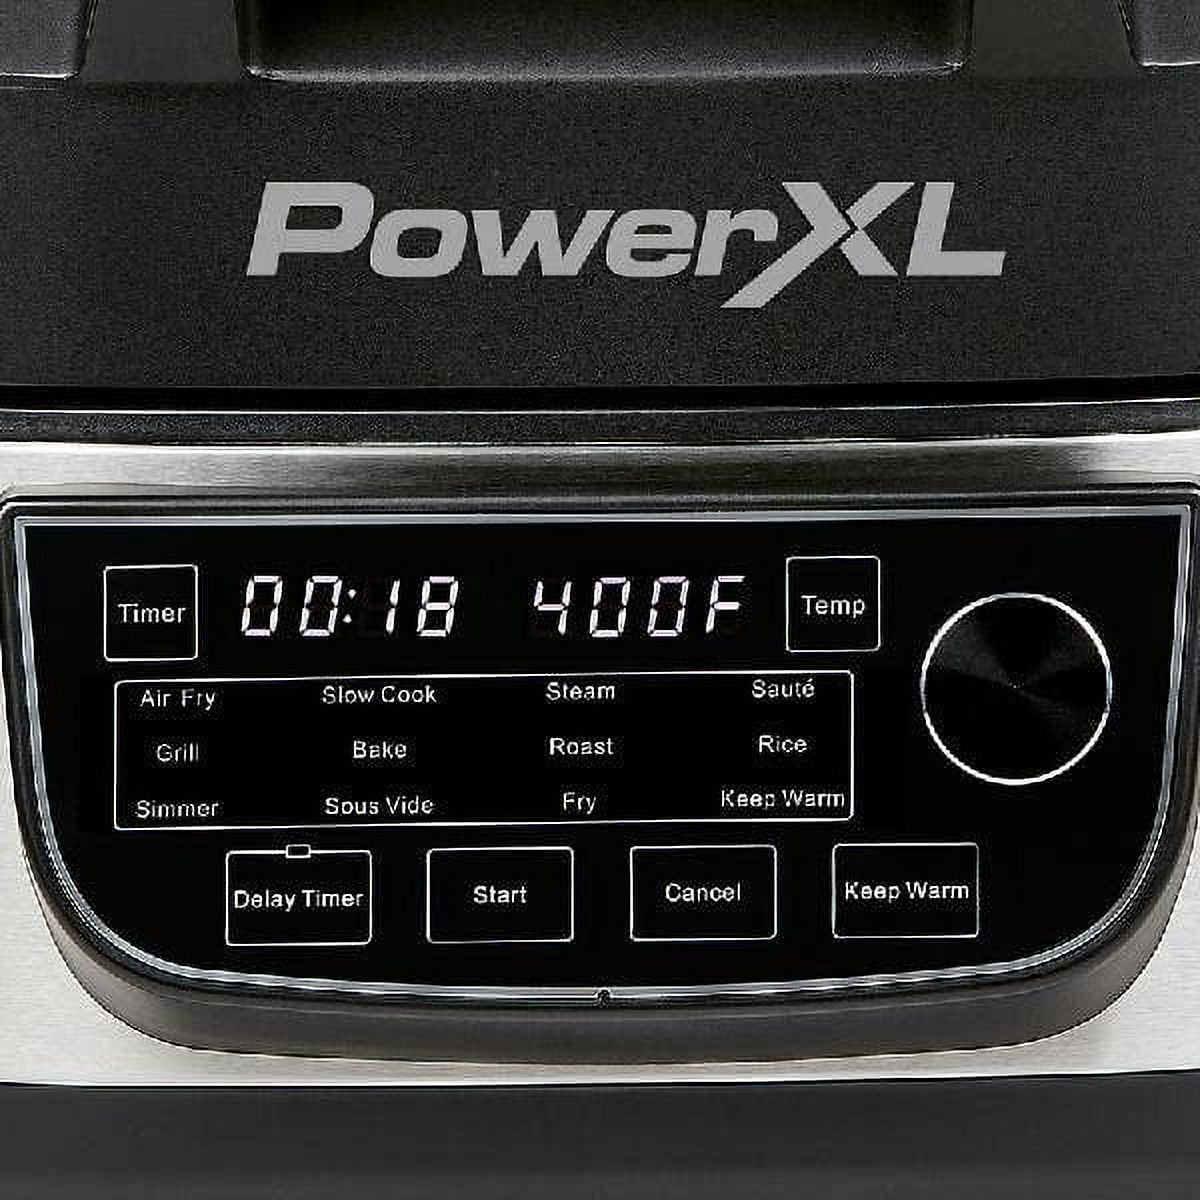 New Power XL 6 Qt. 12-in-1 Grill Air Fryer Combo. This multi-function grill